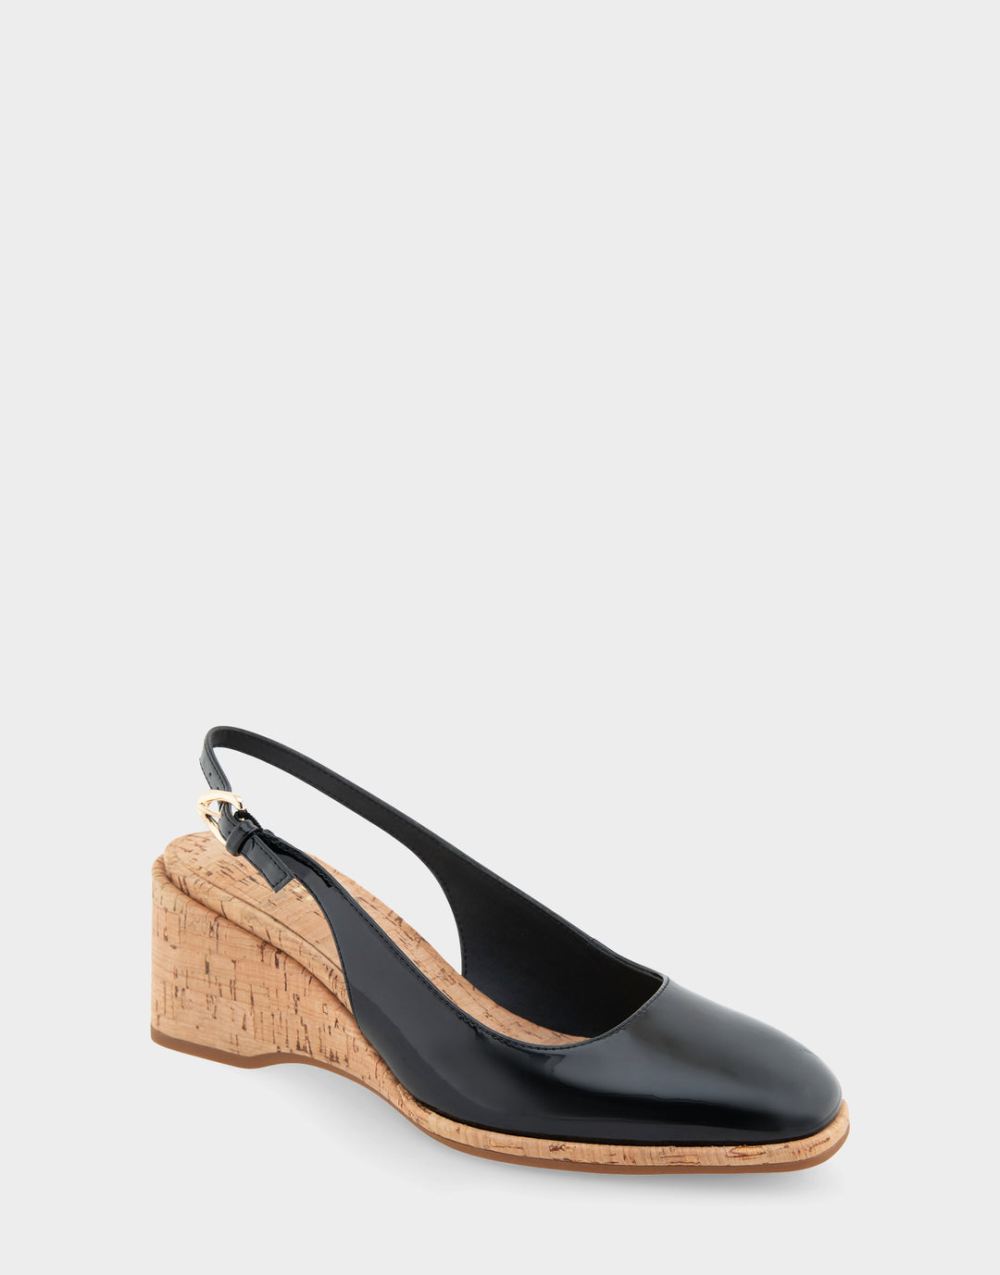 Women's | Aria Black Patent Faux Leather Sculpted Wedge Slingback